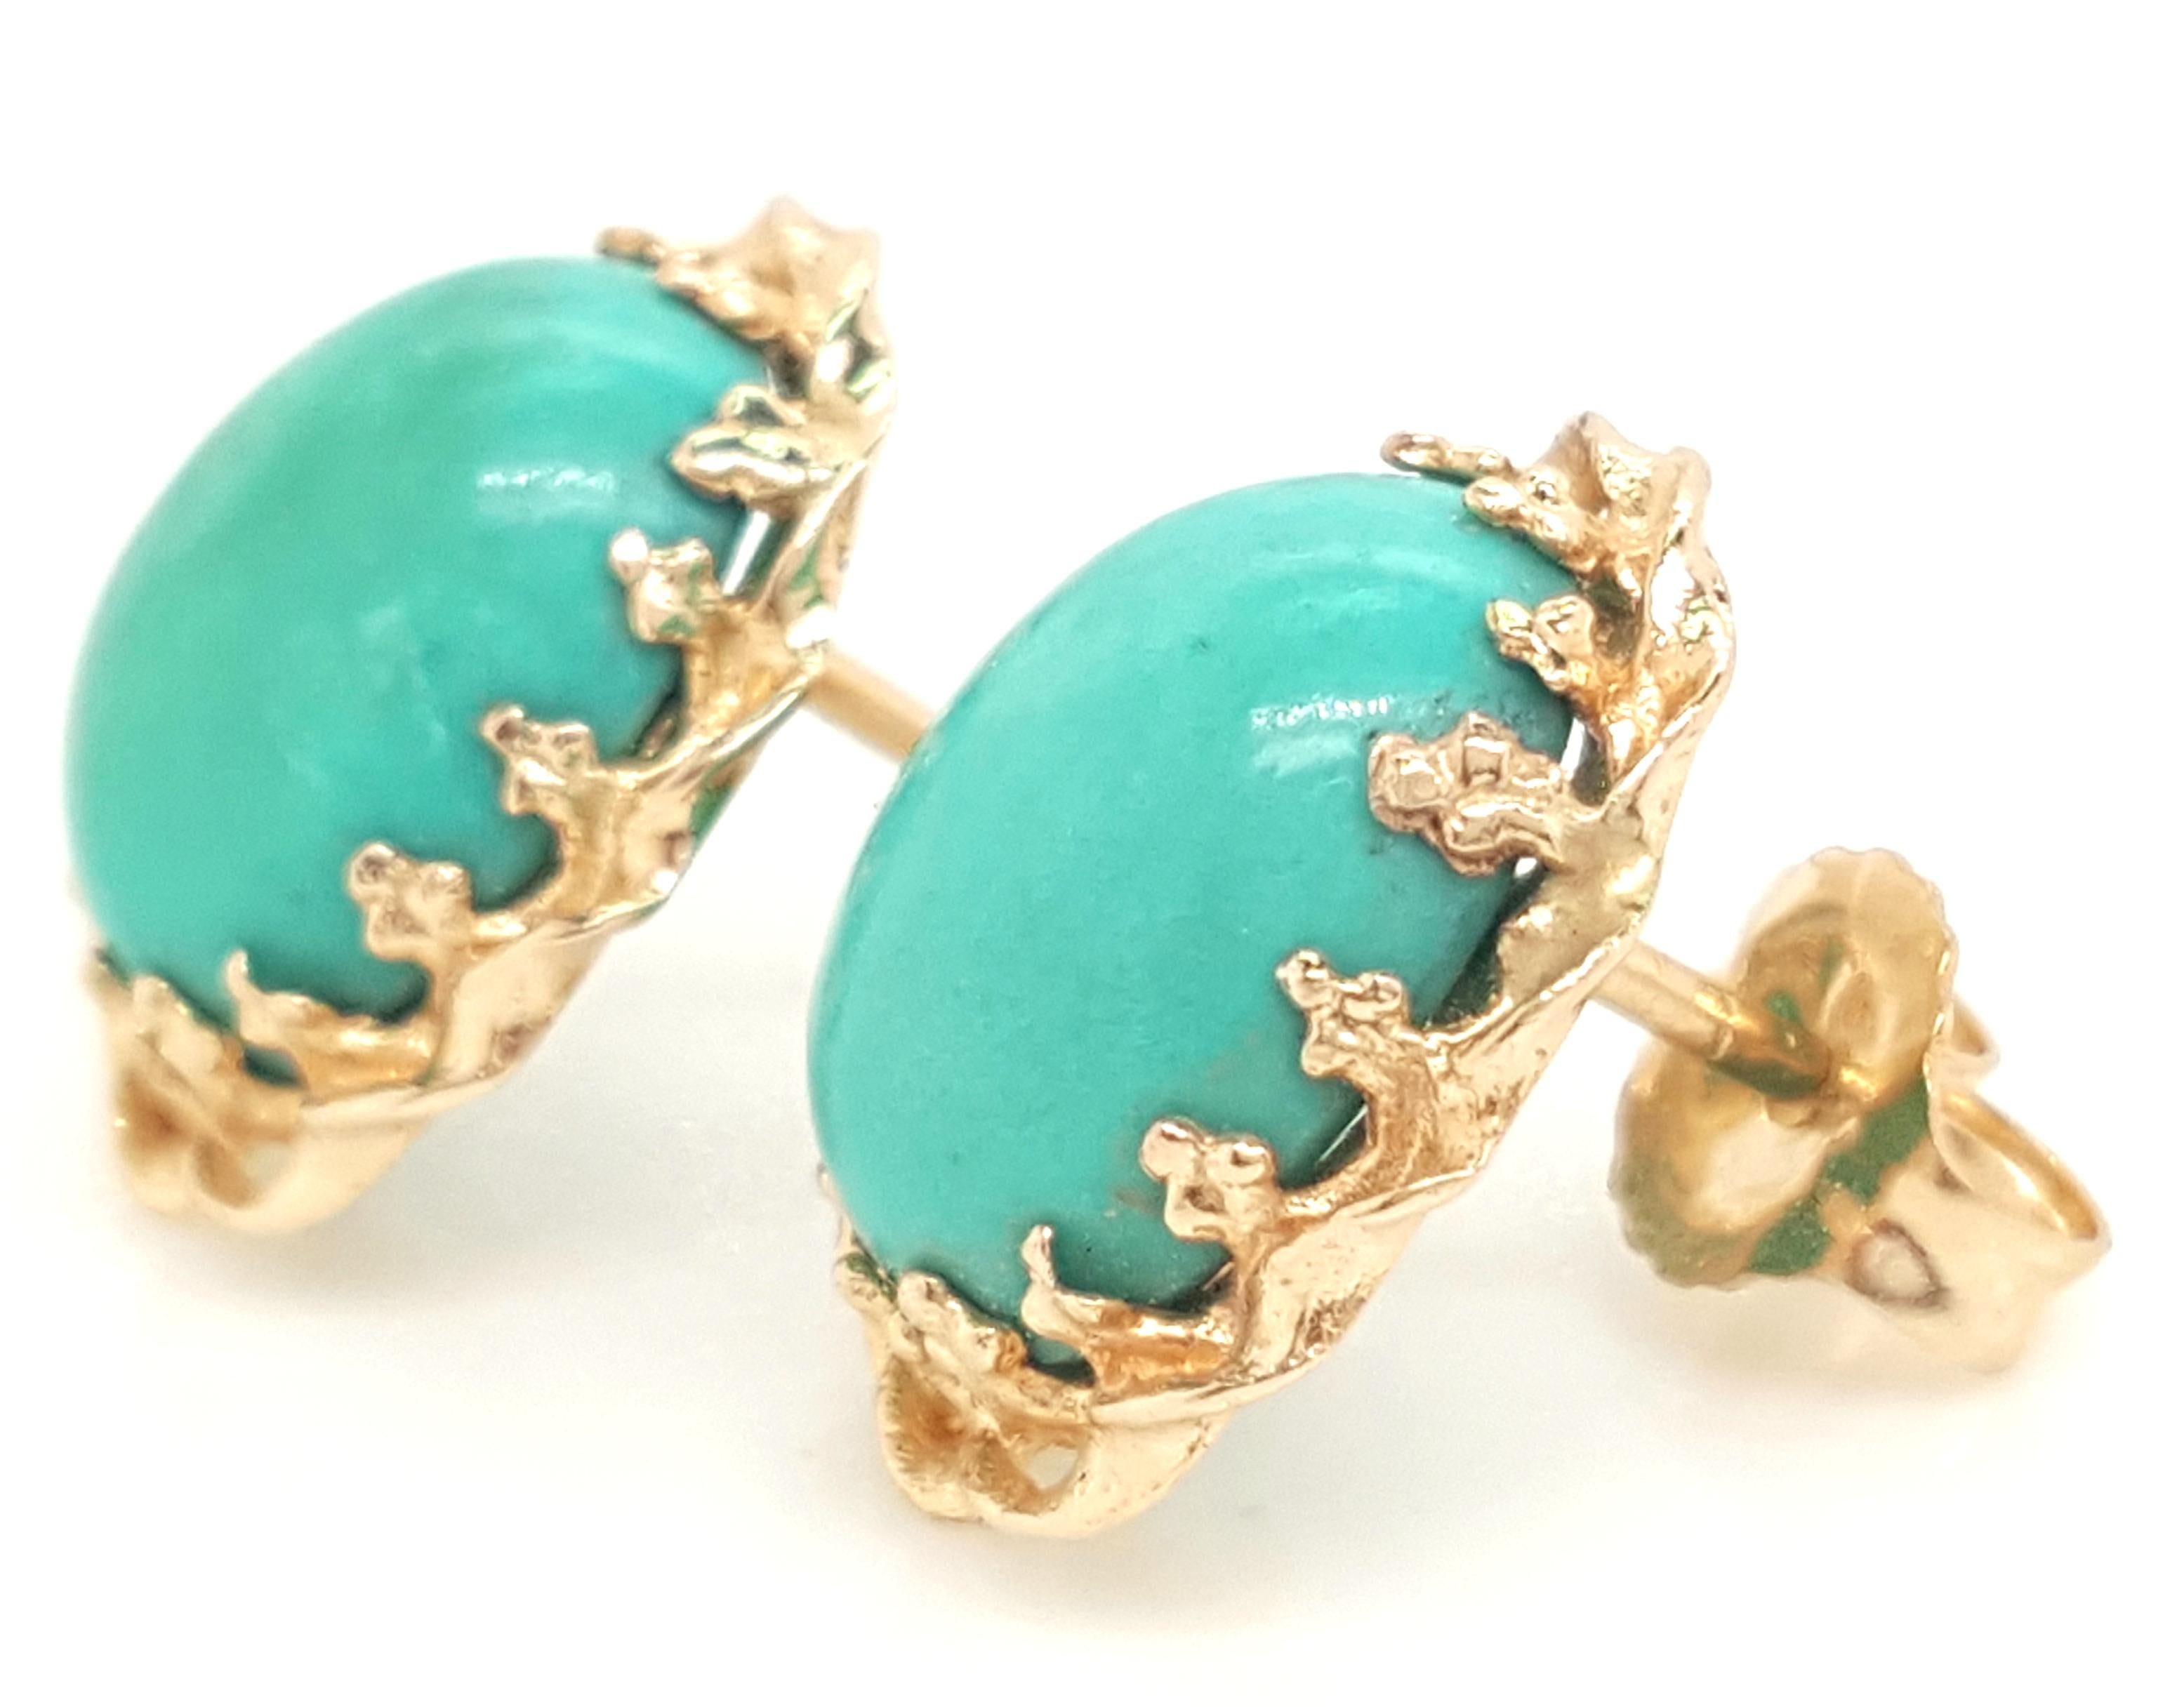 14 Karat Yellow Gold Oval Cabochon Howlite Stud Earrings.  The earrings feature a pair of oval cabochon dyed howlite.  The howlite are each set into a 14 karat yellow gold prong settings with a recessed bezel, completed by posts.  Earrings weigh